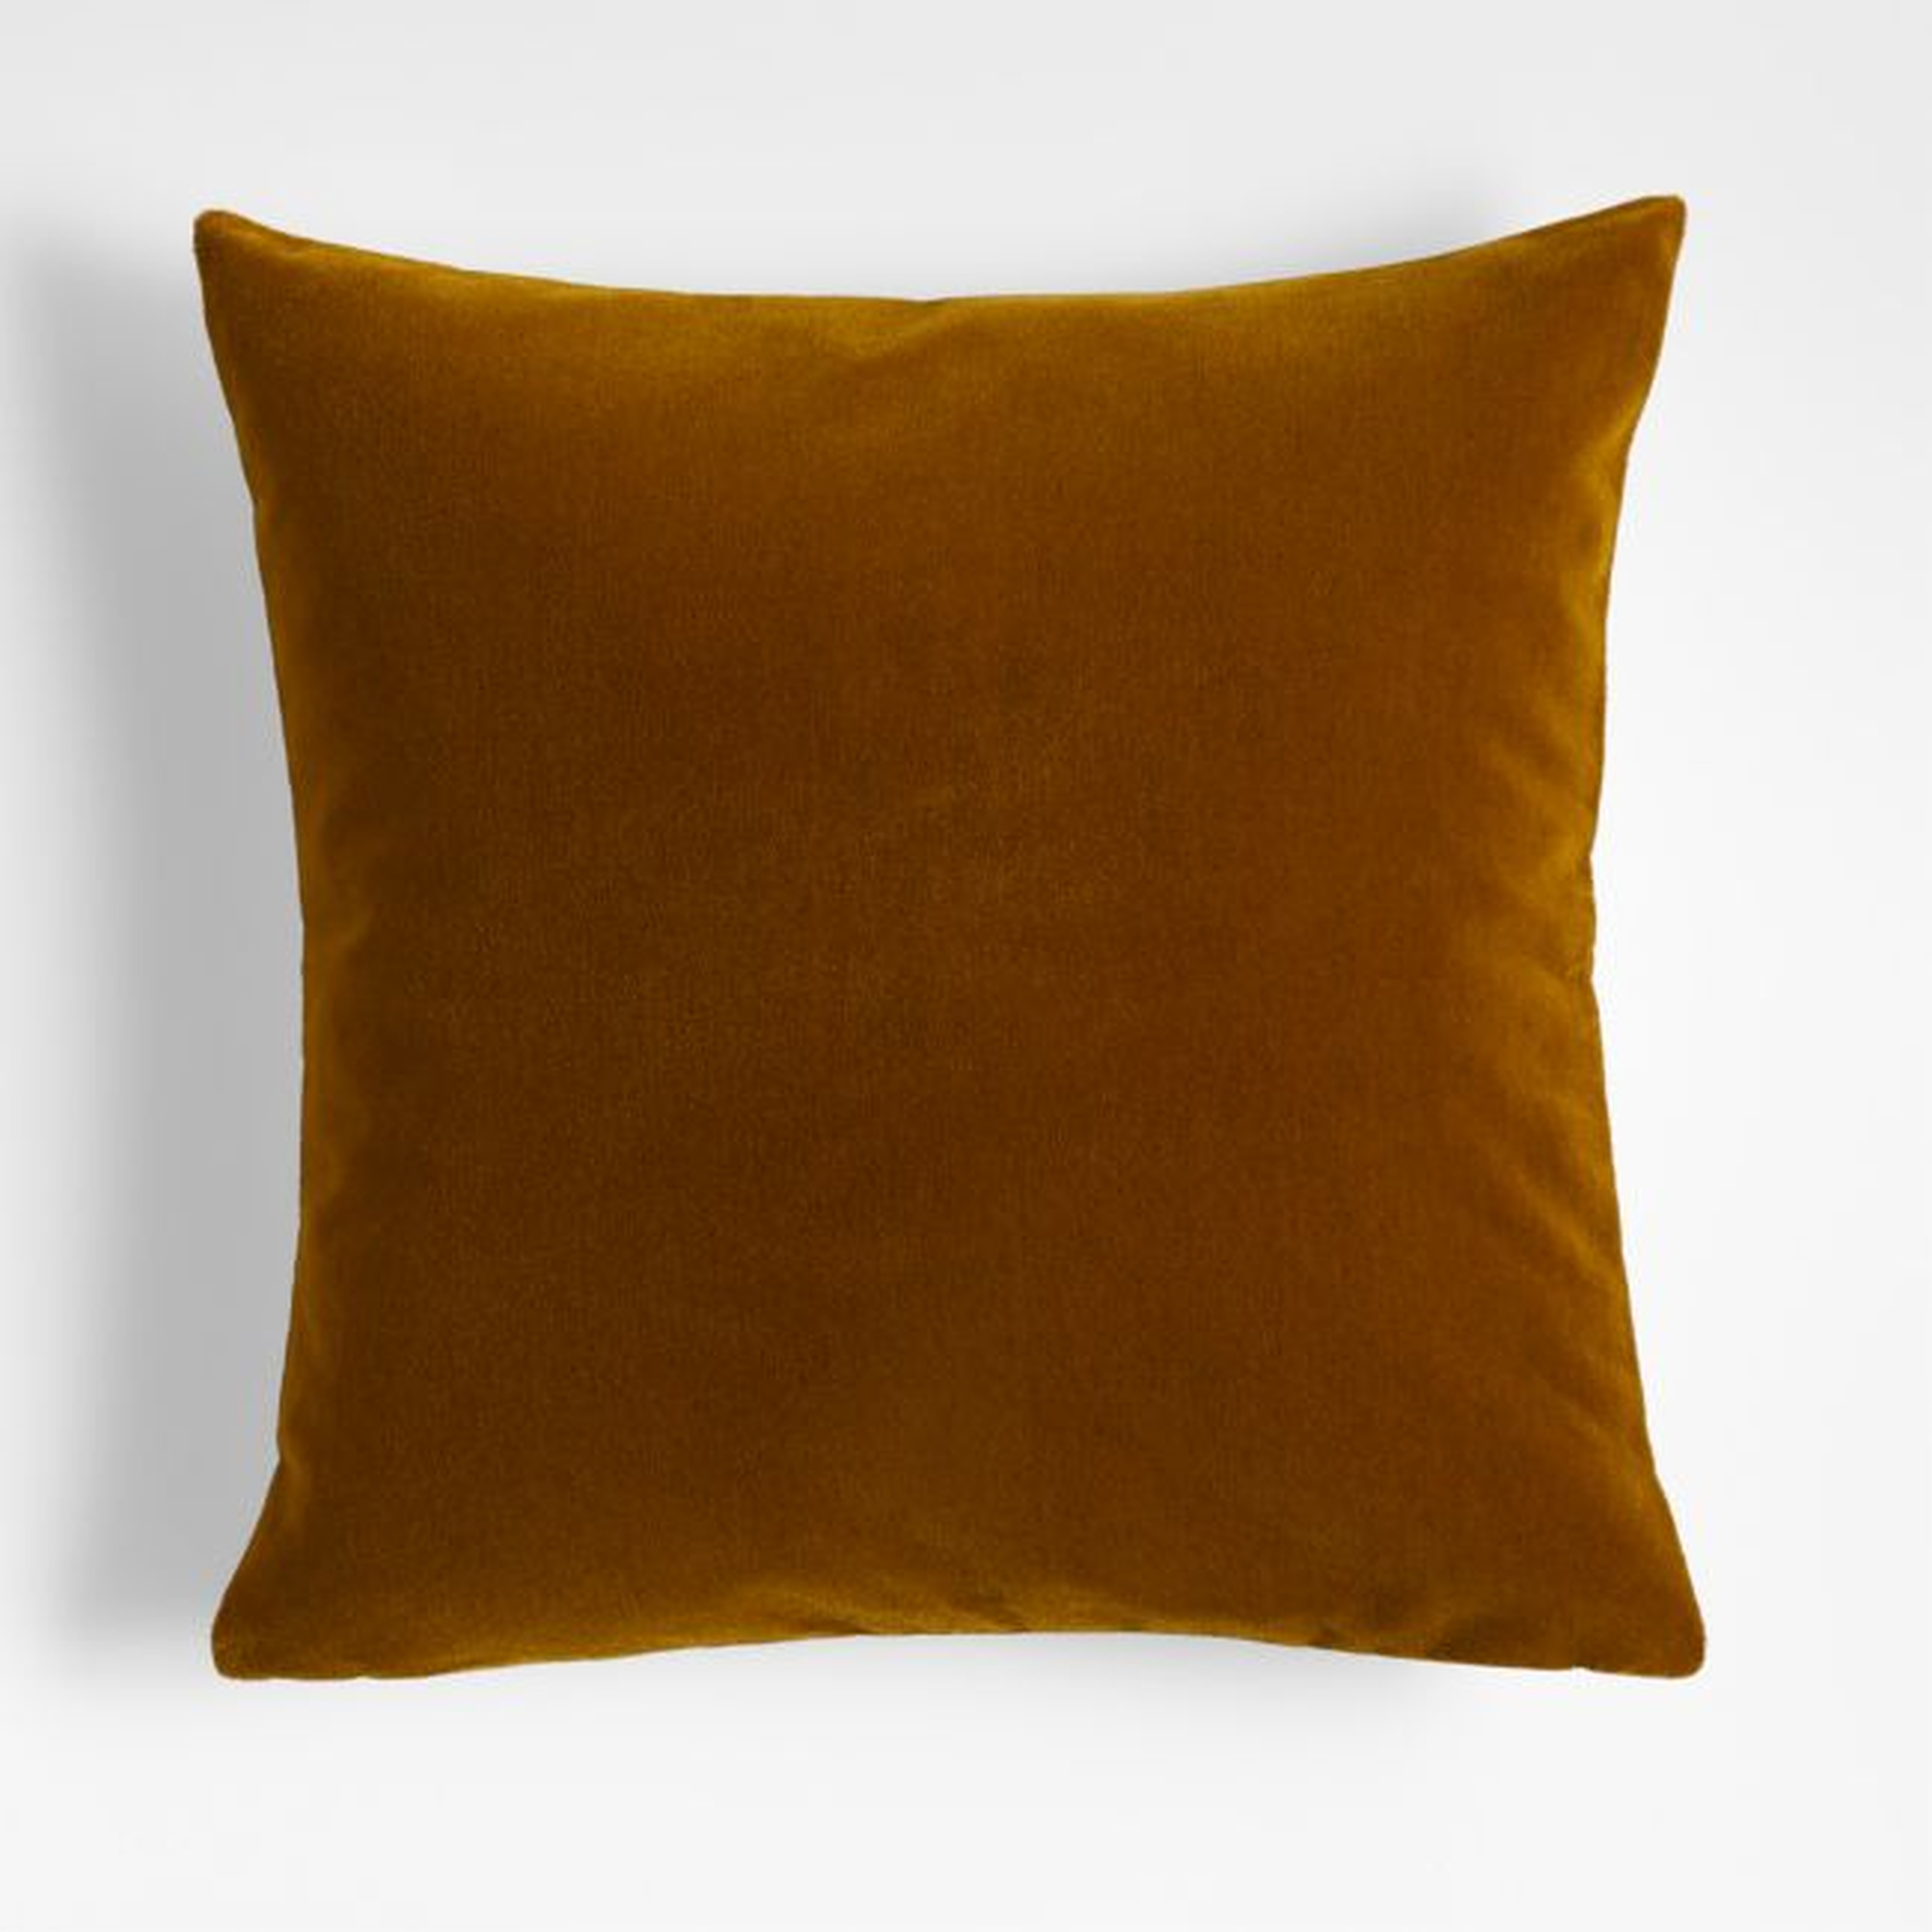 Ocher 20"x20" Faux Mohair Throw Pillow with Down-Alternative Insert - Crate and Barrel